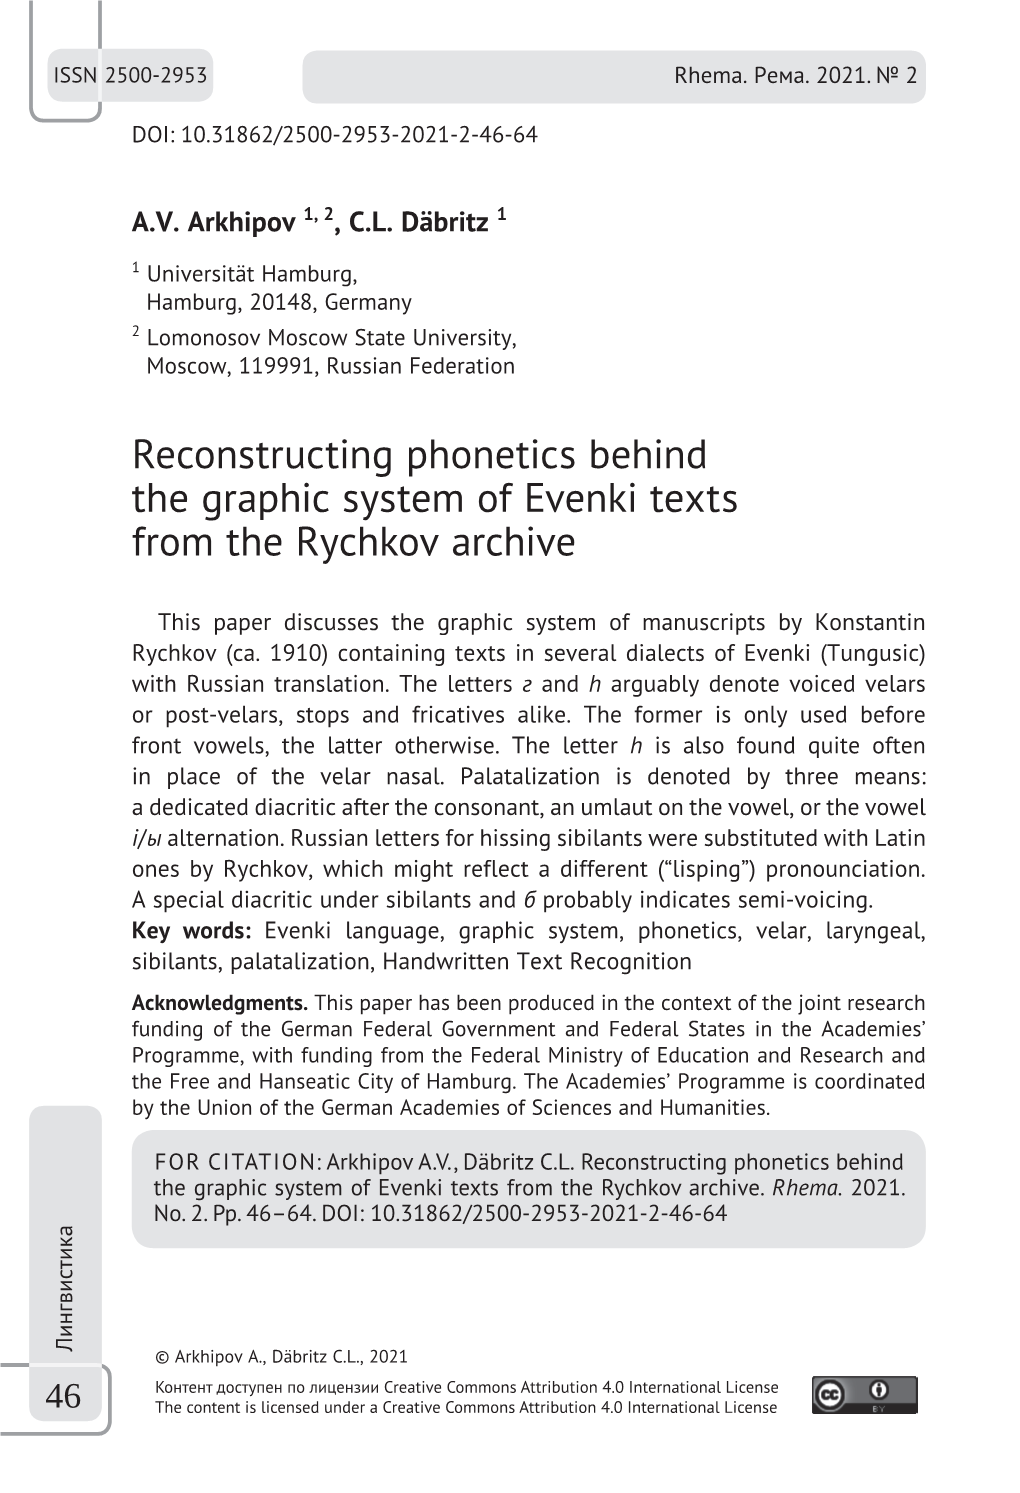 Reconstructing Phonetics Behind the Graphic System of Evenki Texts from the Rychkov Archive